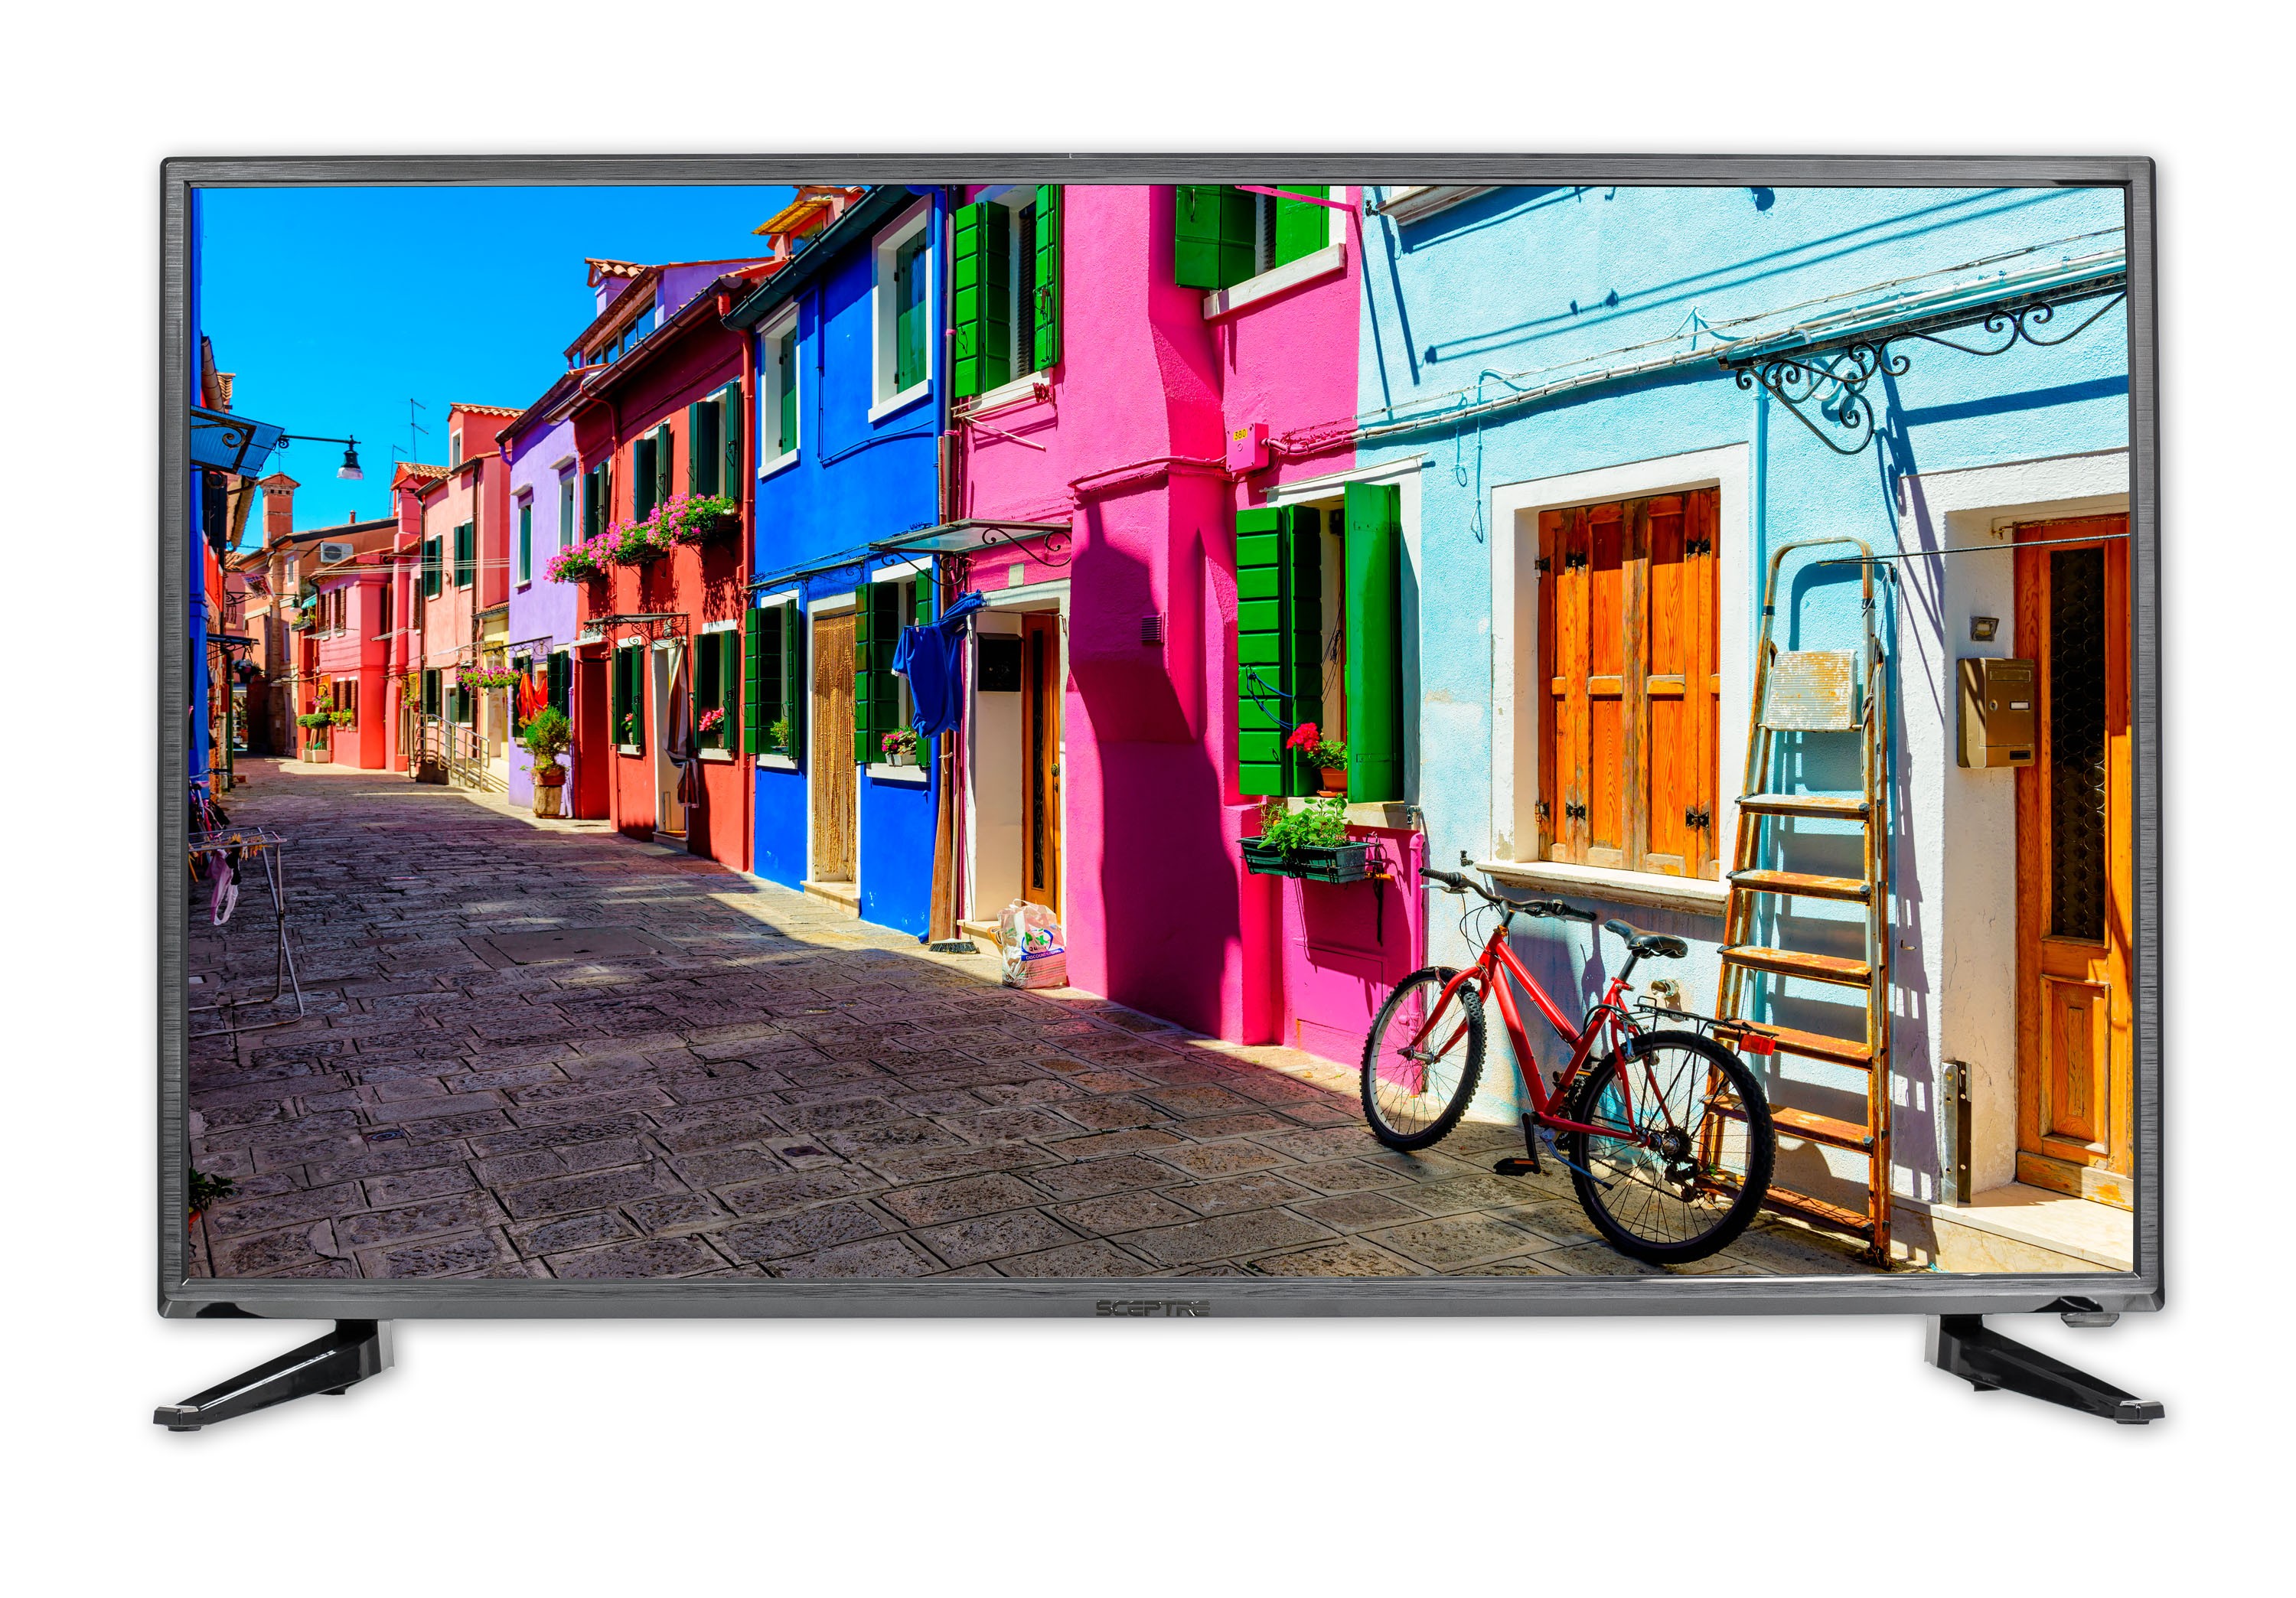 Sceptre 40" Class 1080P FHD LED TV with Built-in DVD E405BD-F - image 1 of 8